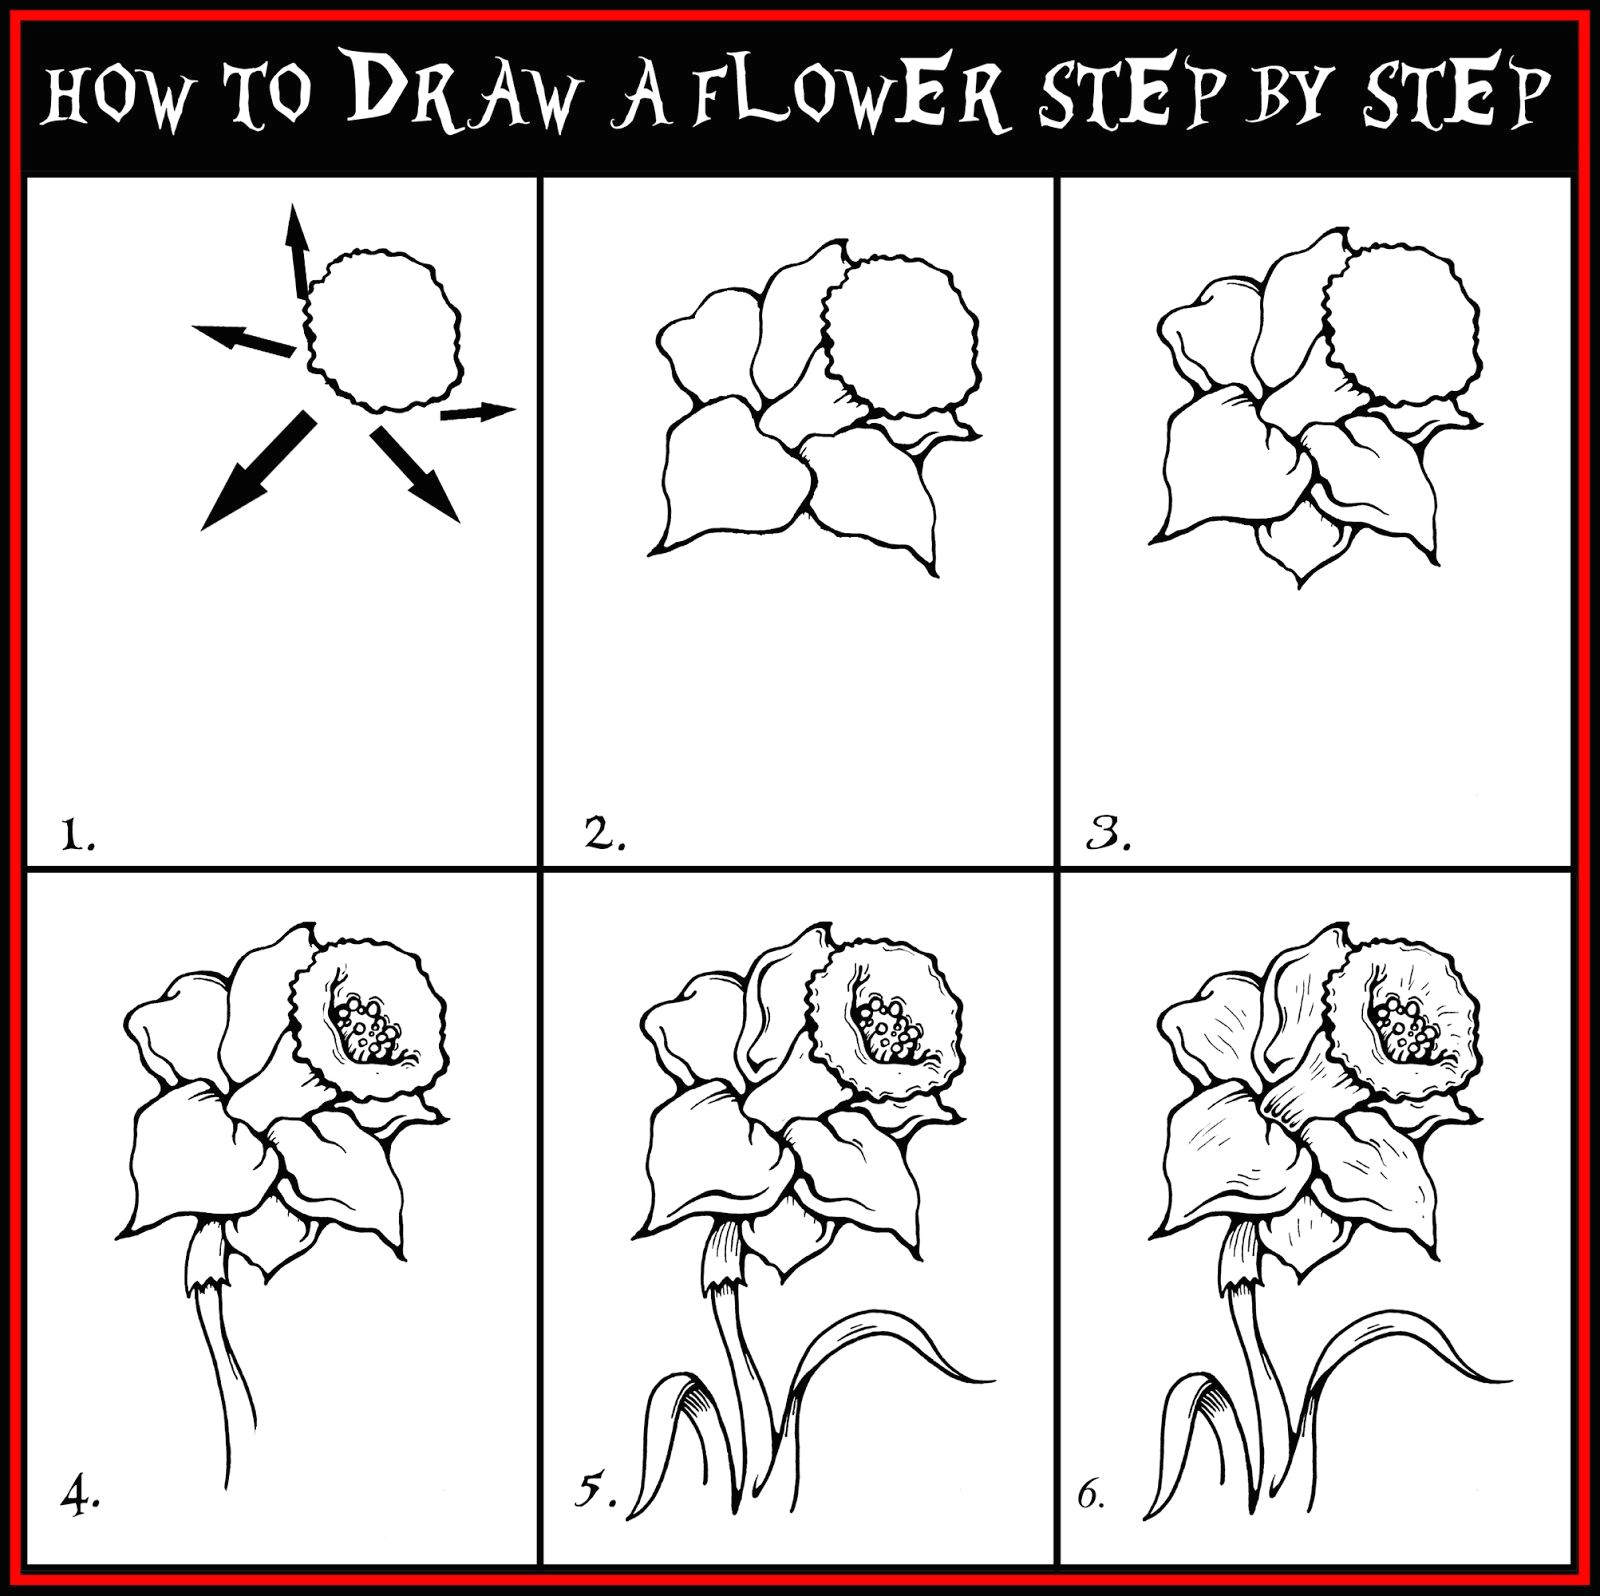 100 best how to draw tutorials flowers images drawing techniques learn drawing drawing flowers